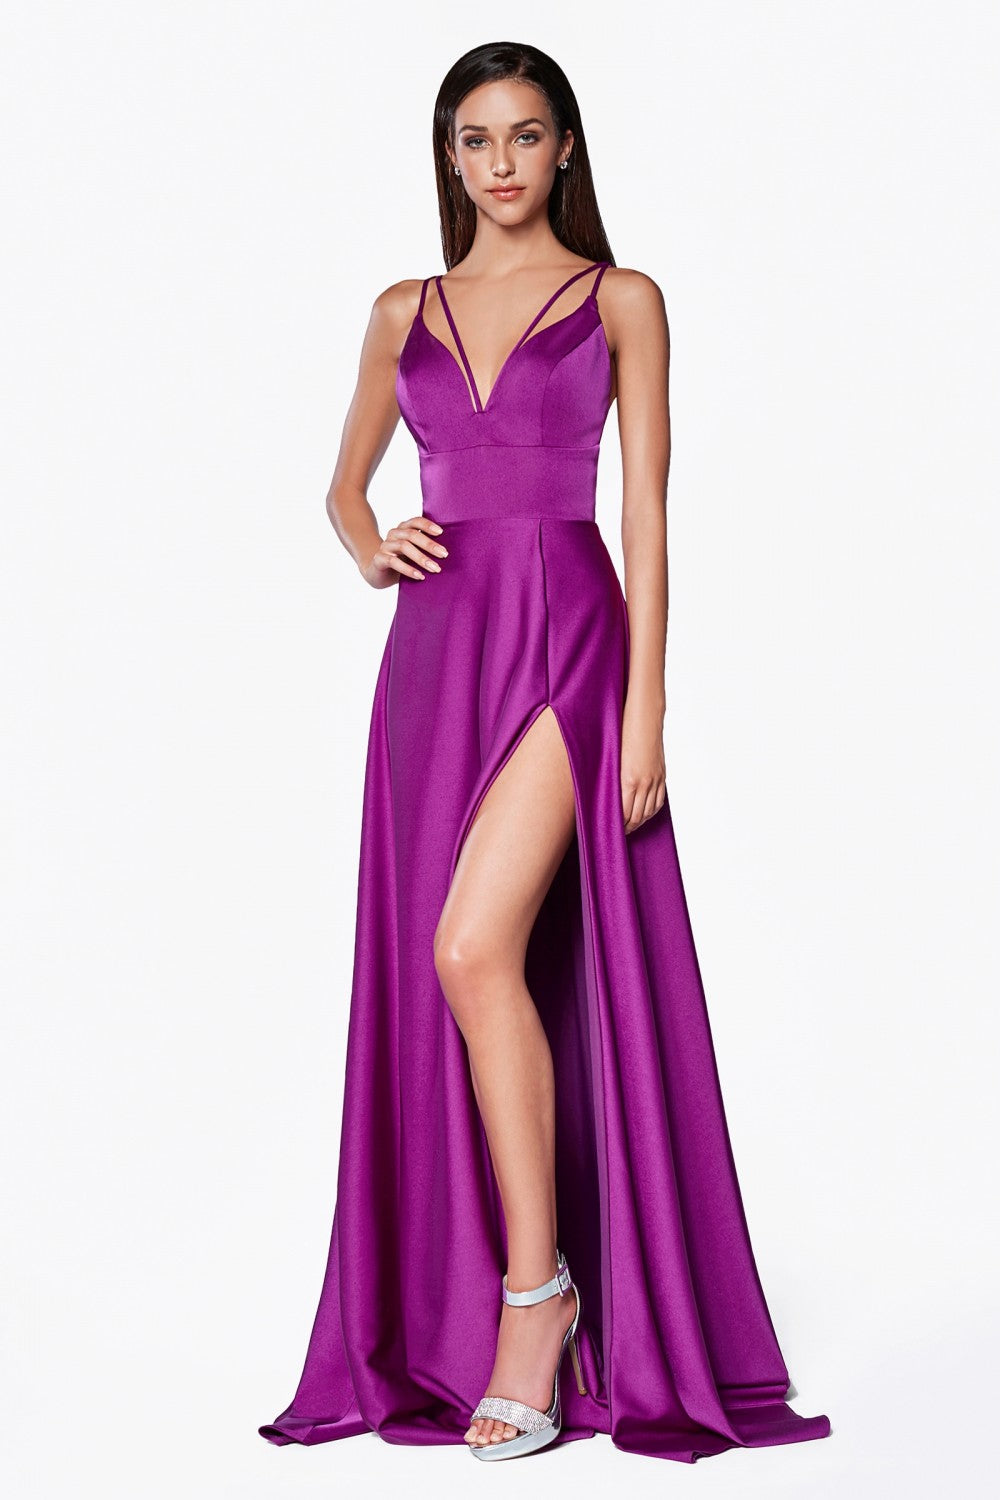 Classic A-line Ball & Prom Gown V-neckline Open Back Bodice with Double Criss Cross Straps Reckless High Leg Slit CDCS034 Elsy Style Evening Dress